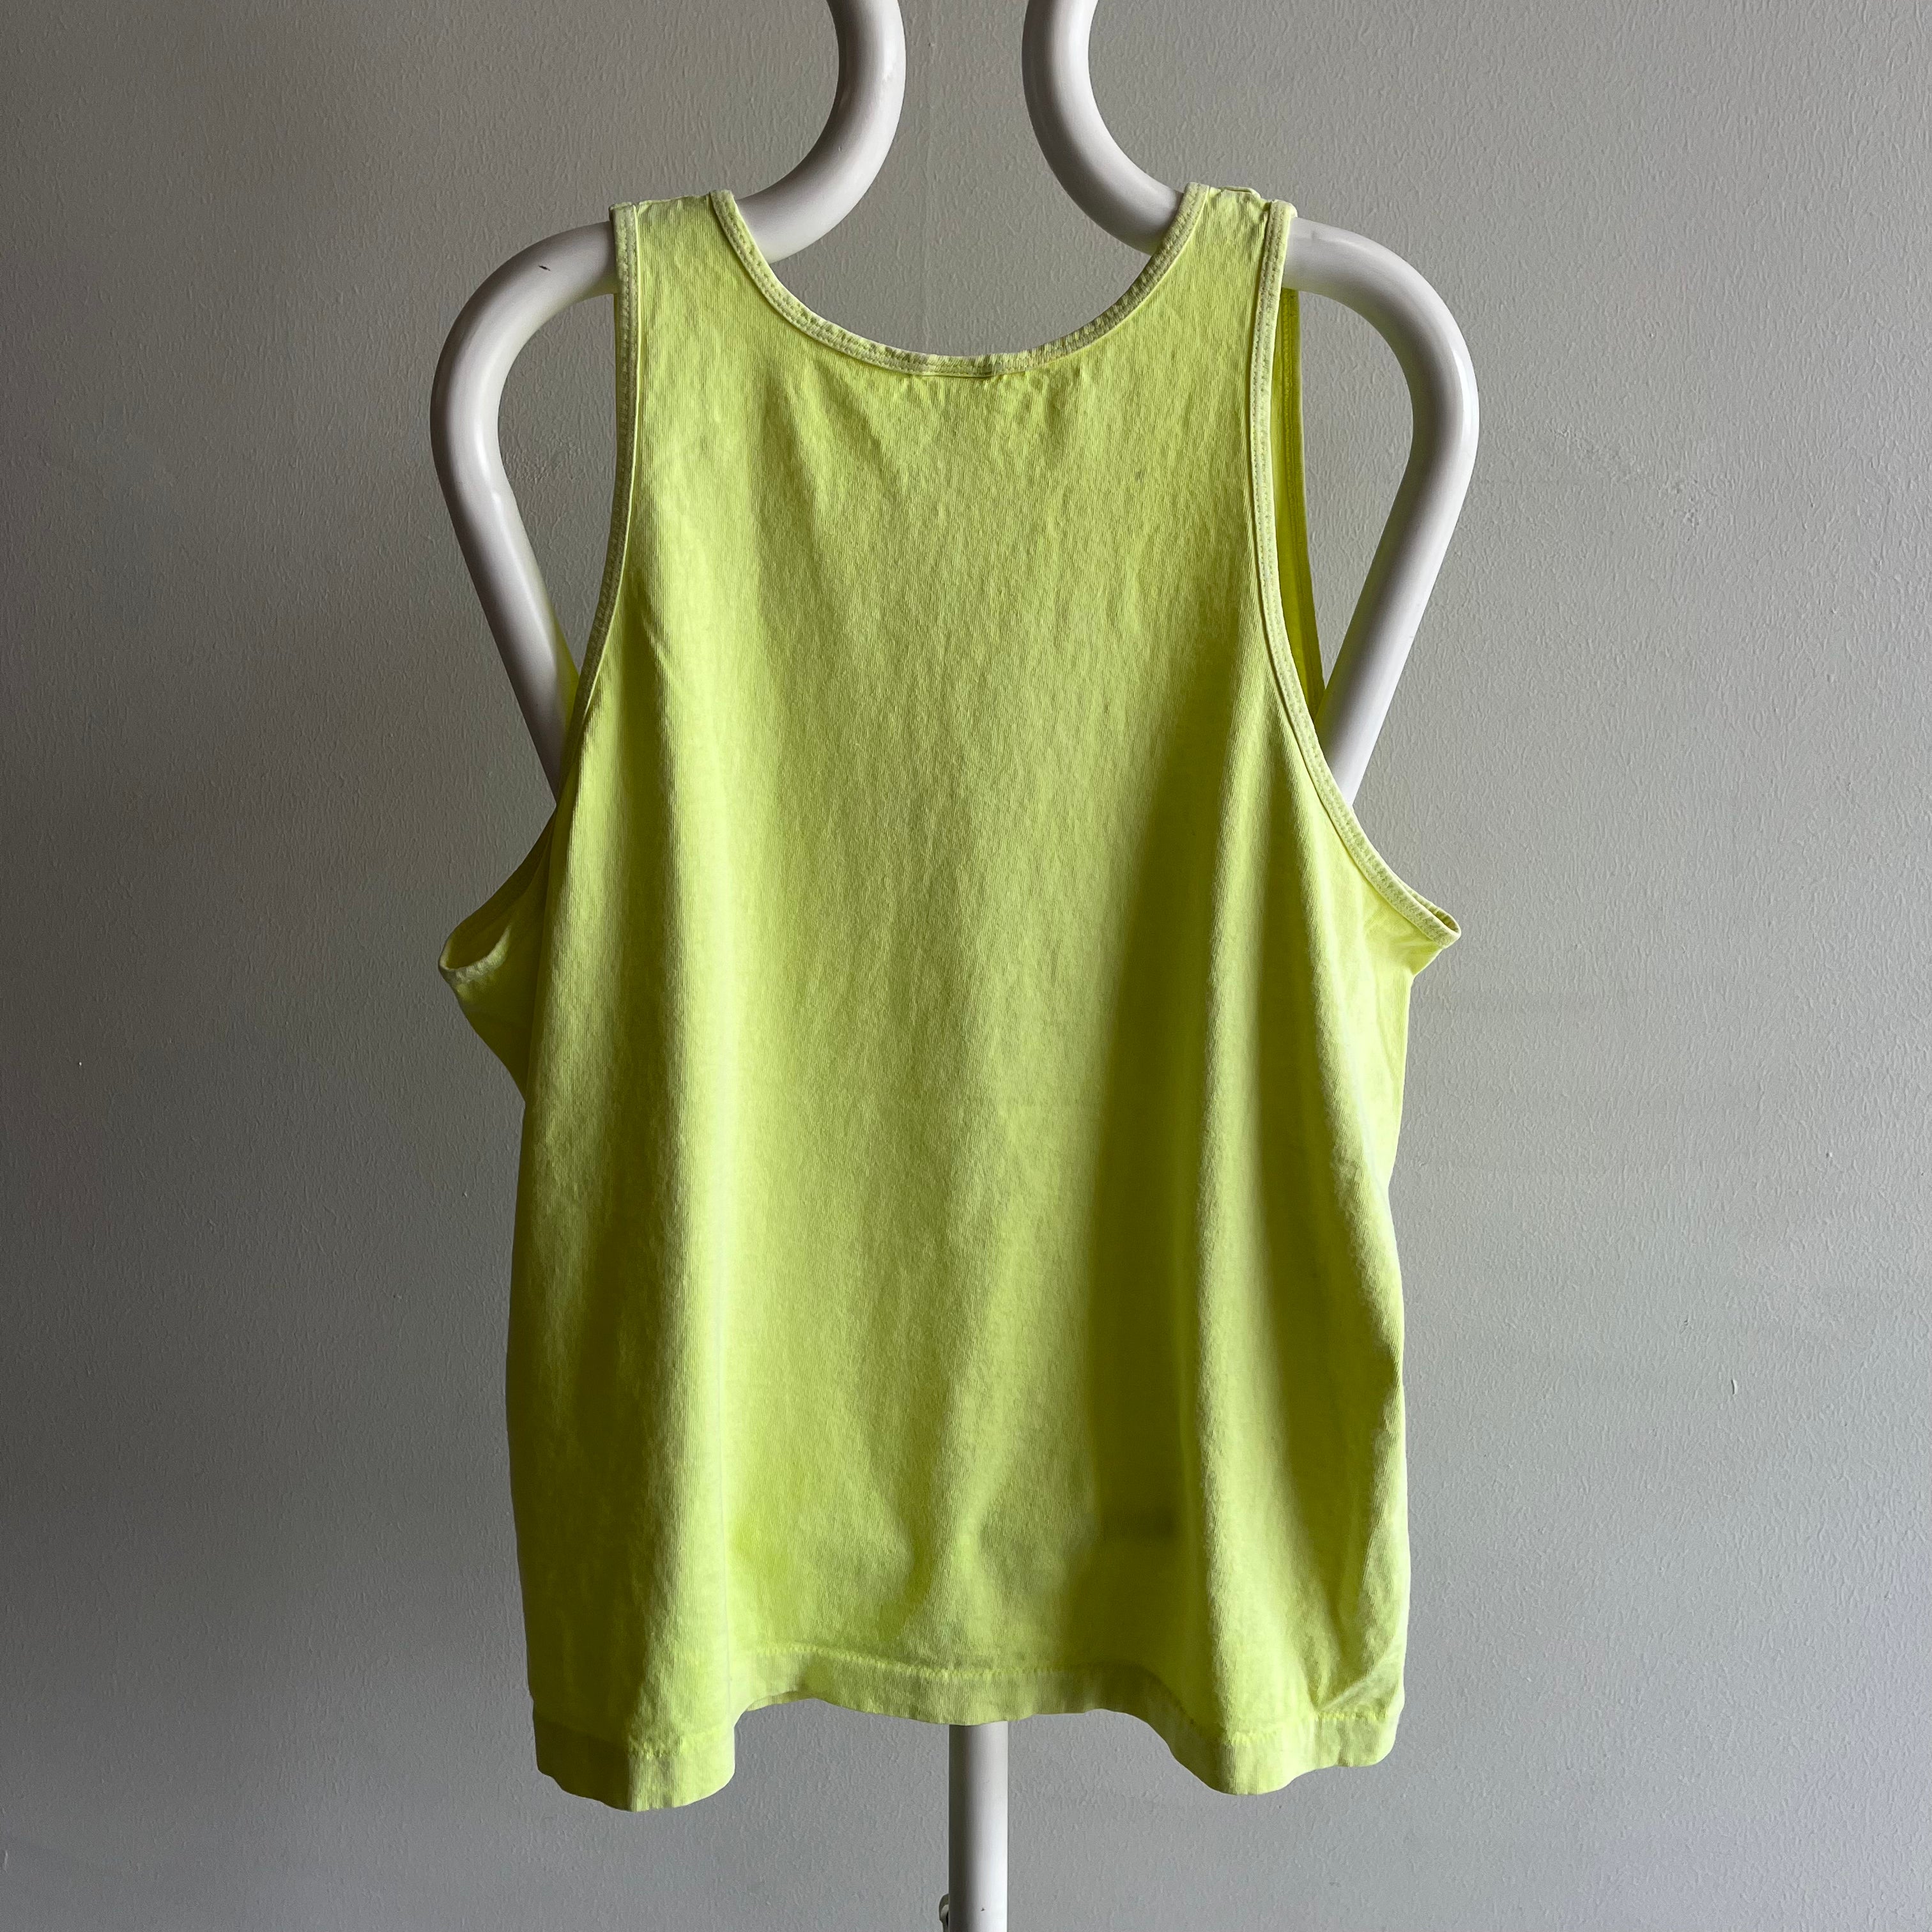 1980s Chevy - The Heartbeat of America Neon Yellow Tank Top